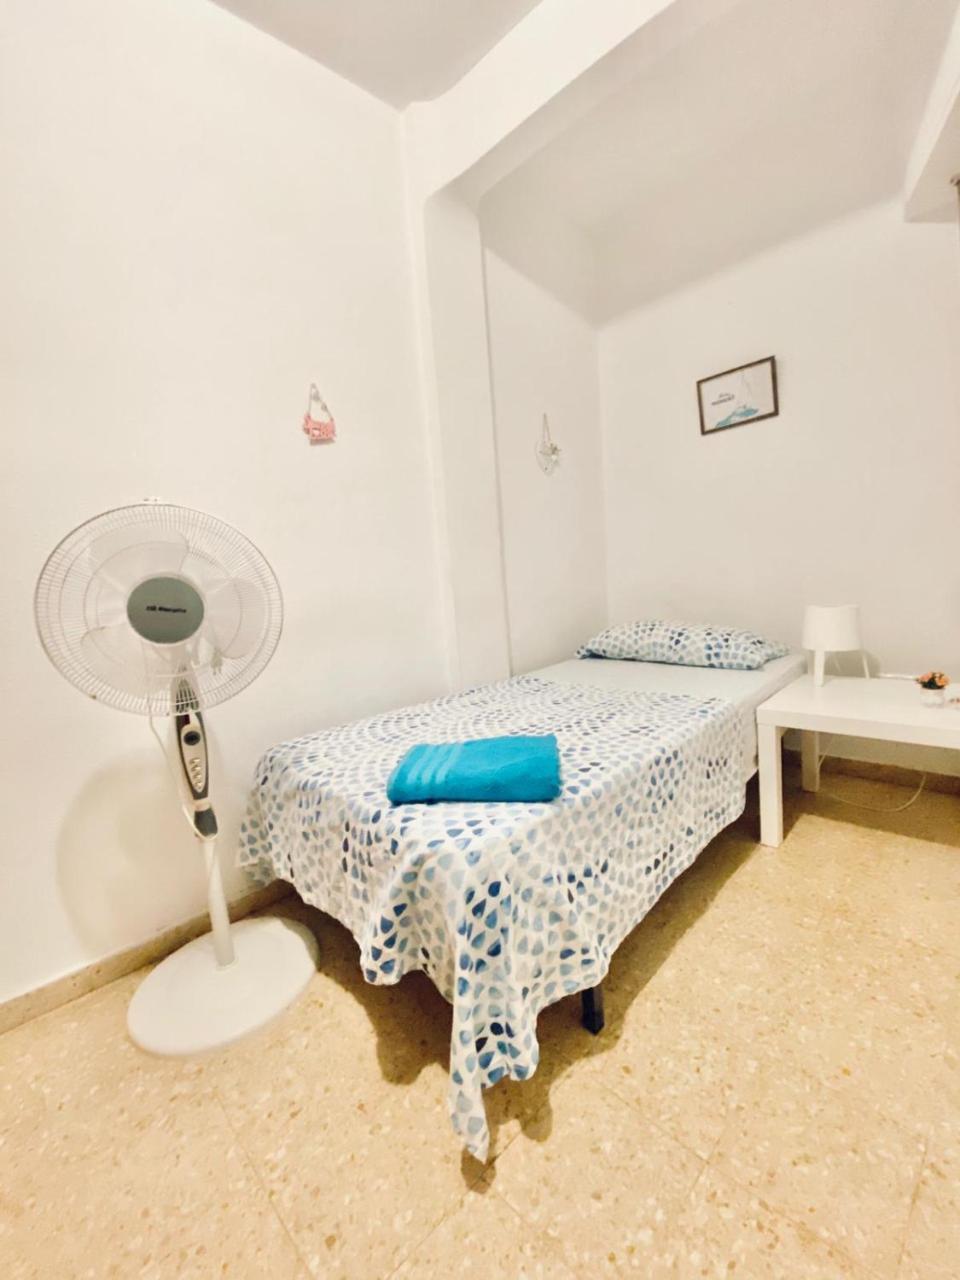 3 Private Room In The Center By The Sea, Wifi